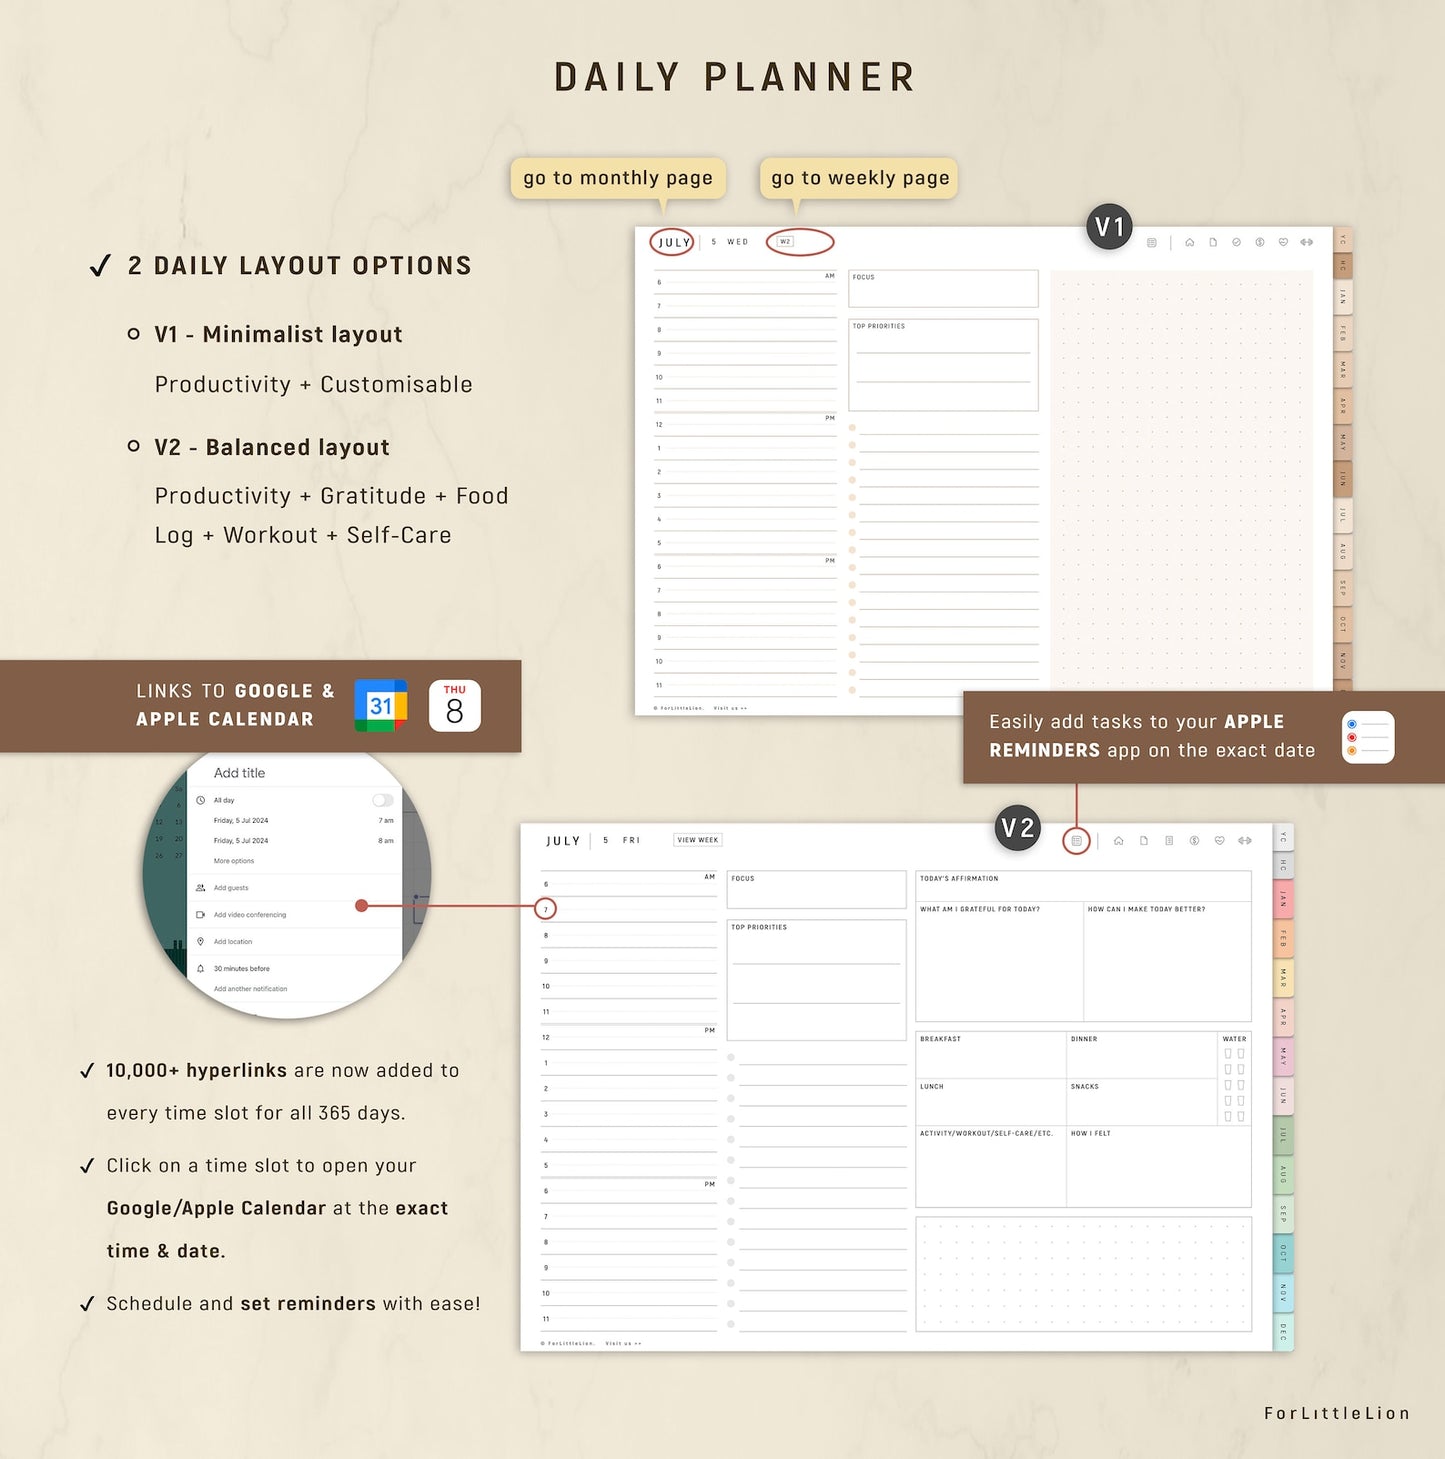 The Custom All-in-One Digital Planner | 2024 + Undated